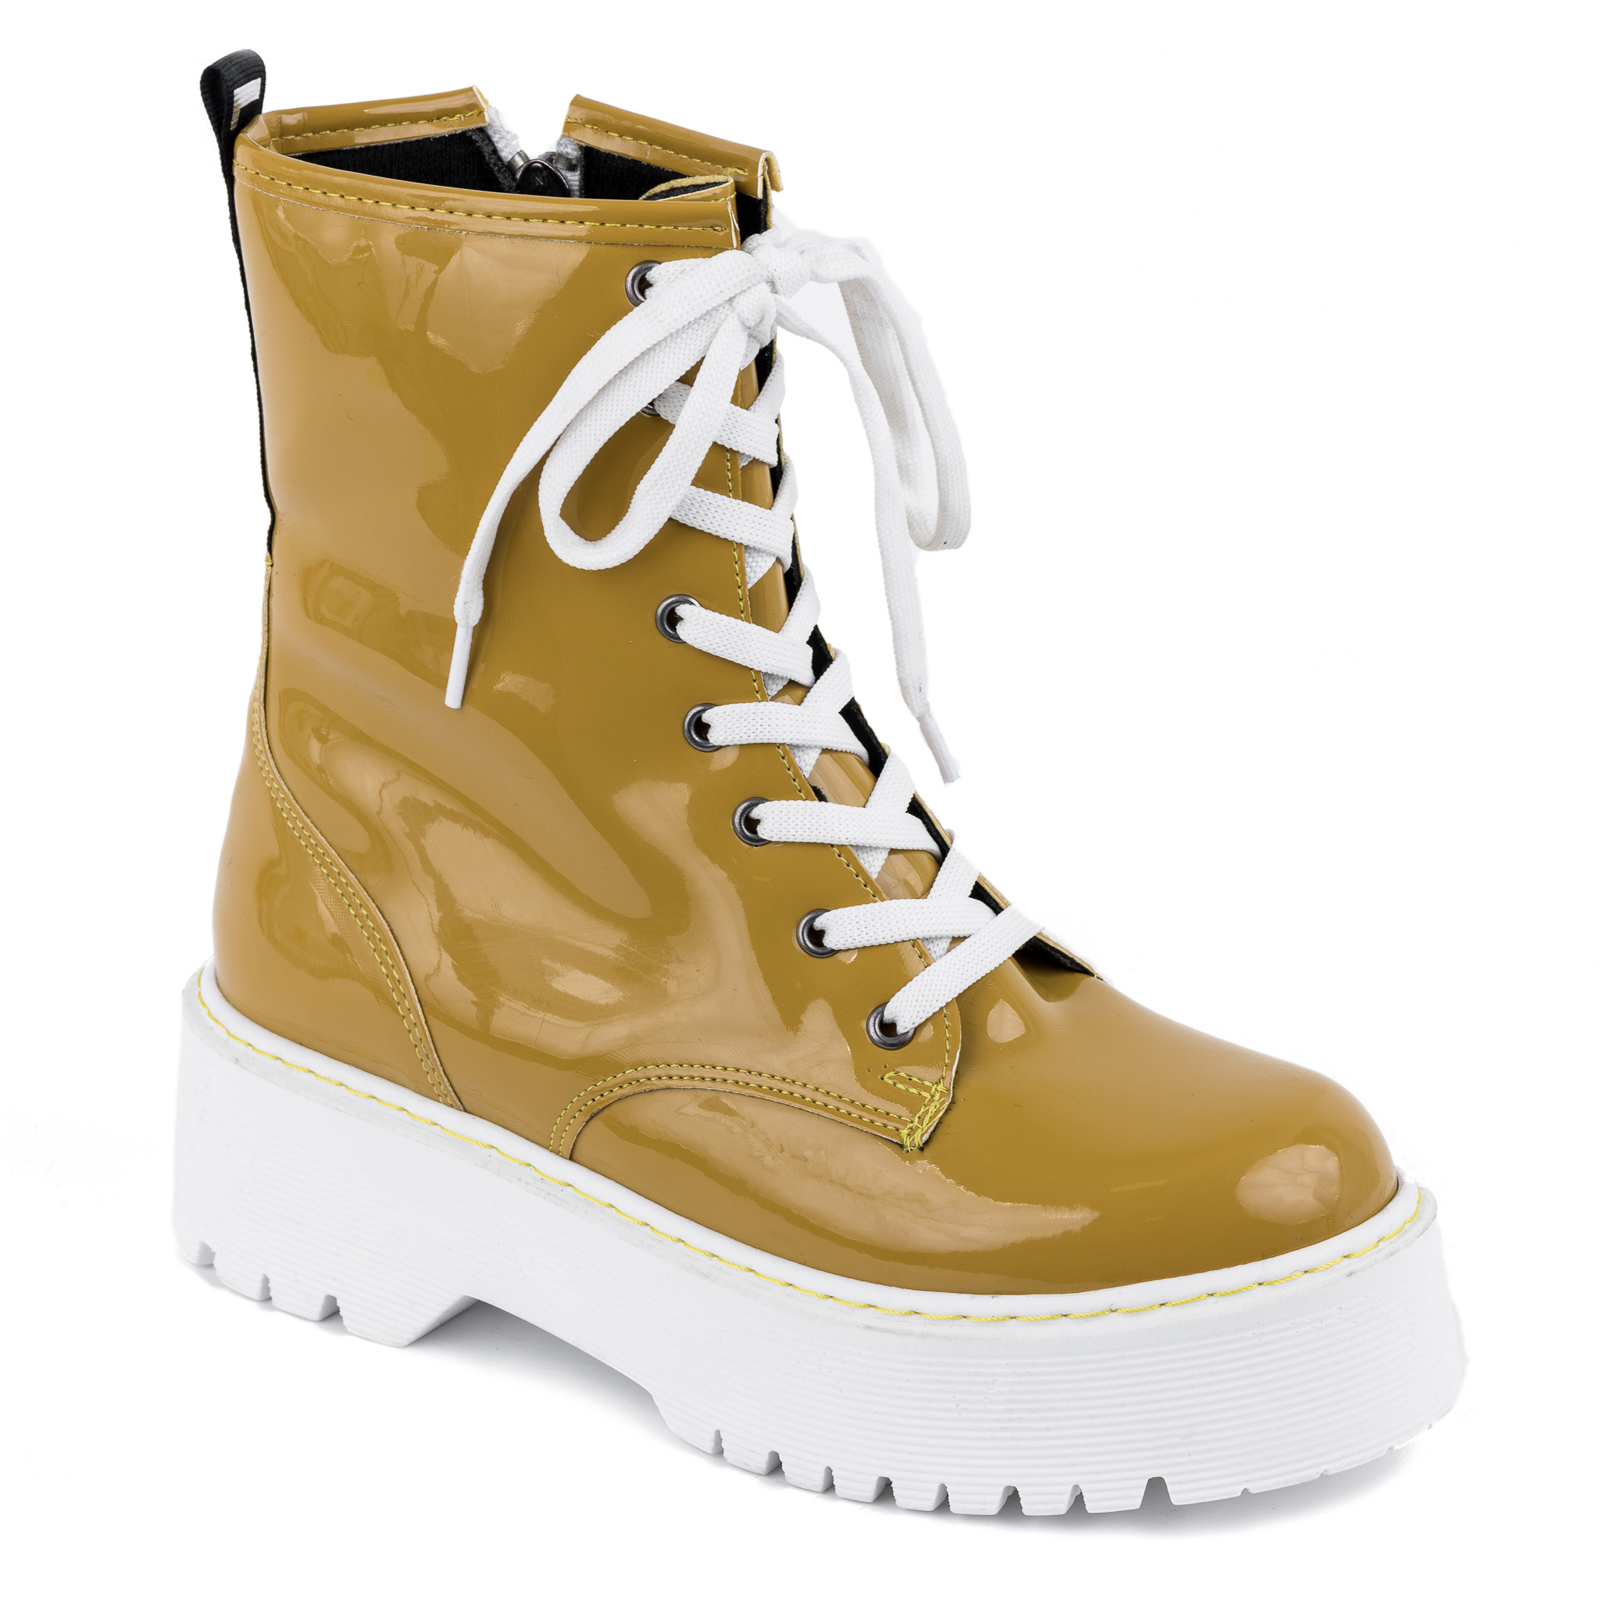 PATENT MARTIN BOOTS WITH WHITE SOLE - OCHRE 